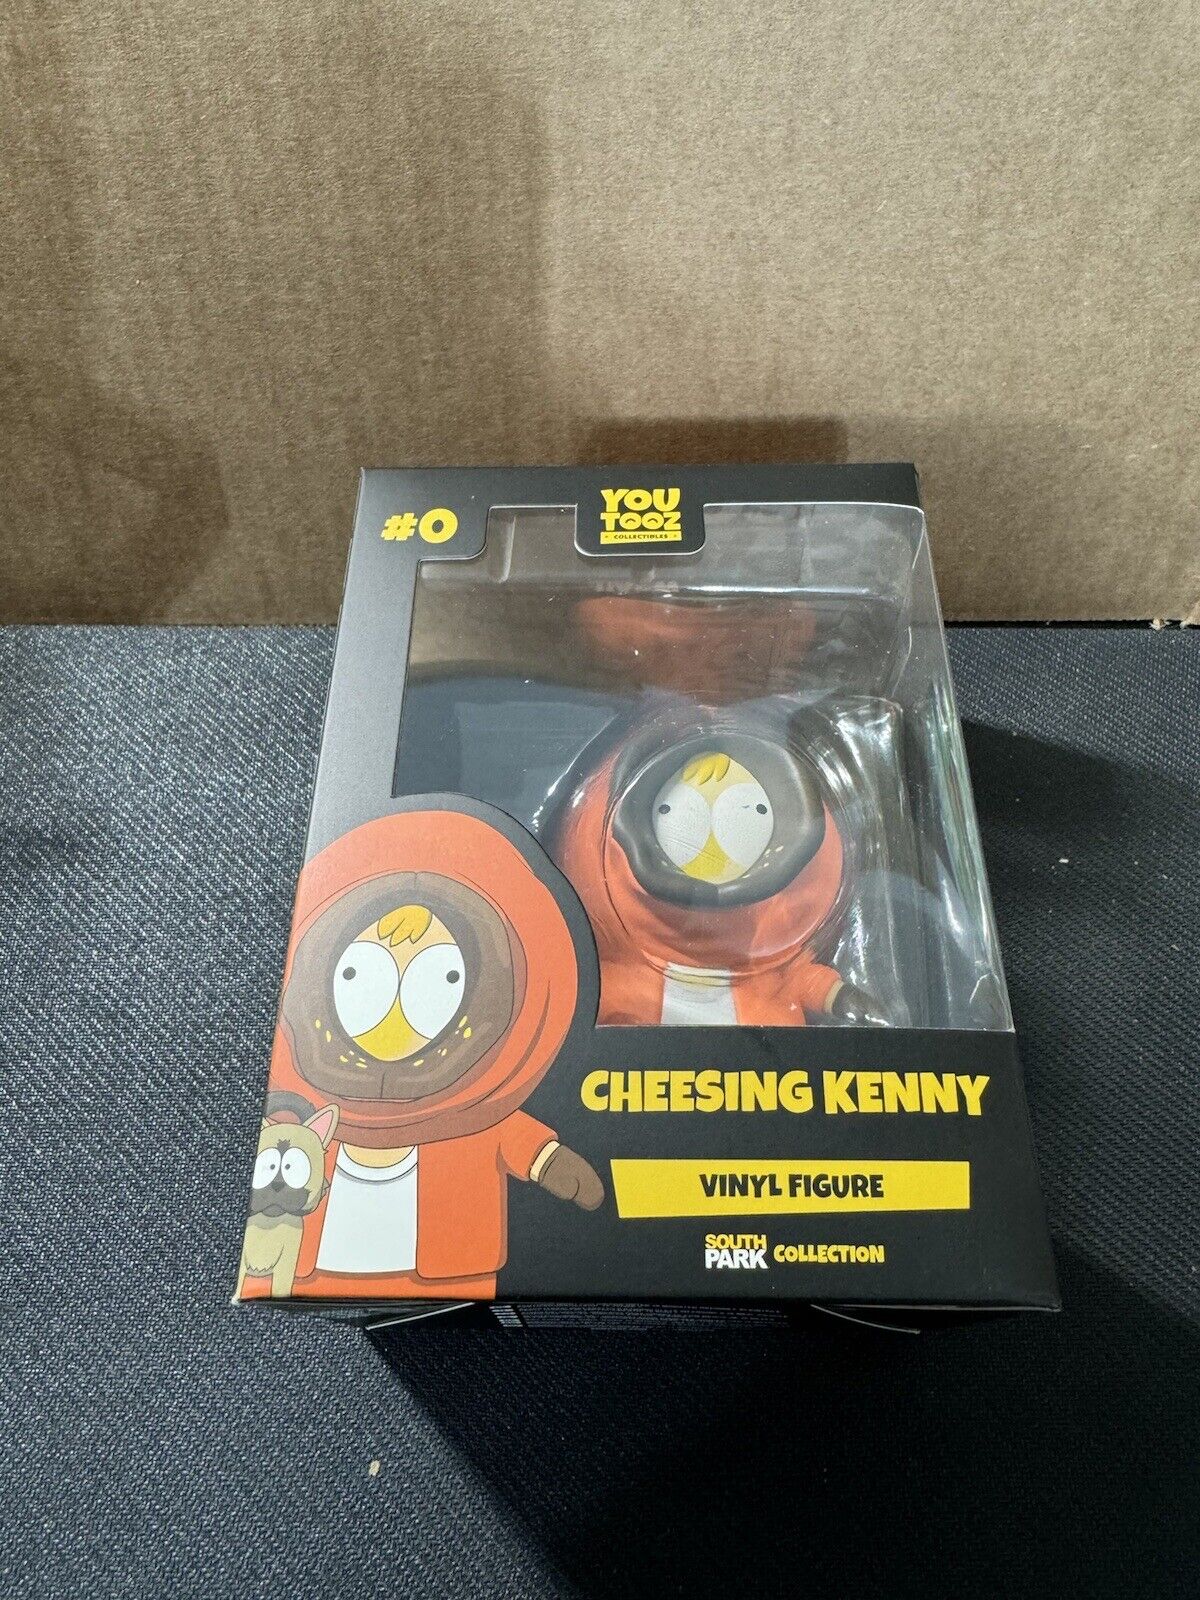 Youtooz South Park Collection - Cheesing Kenny Vinyl Figure #0